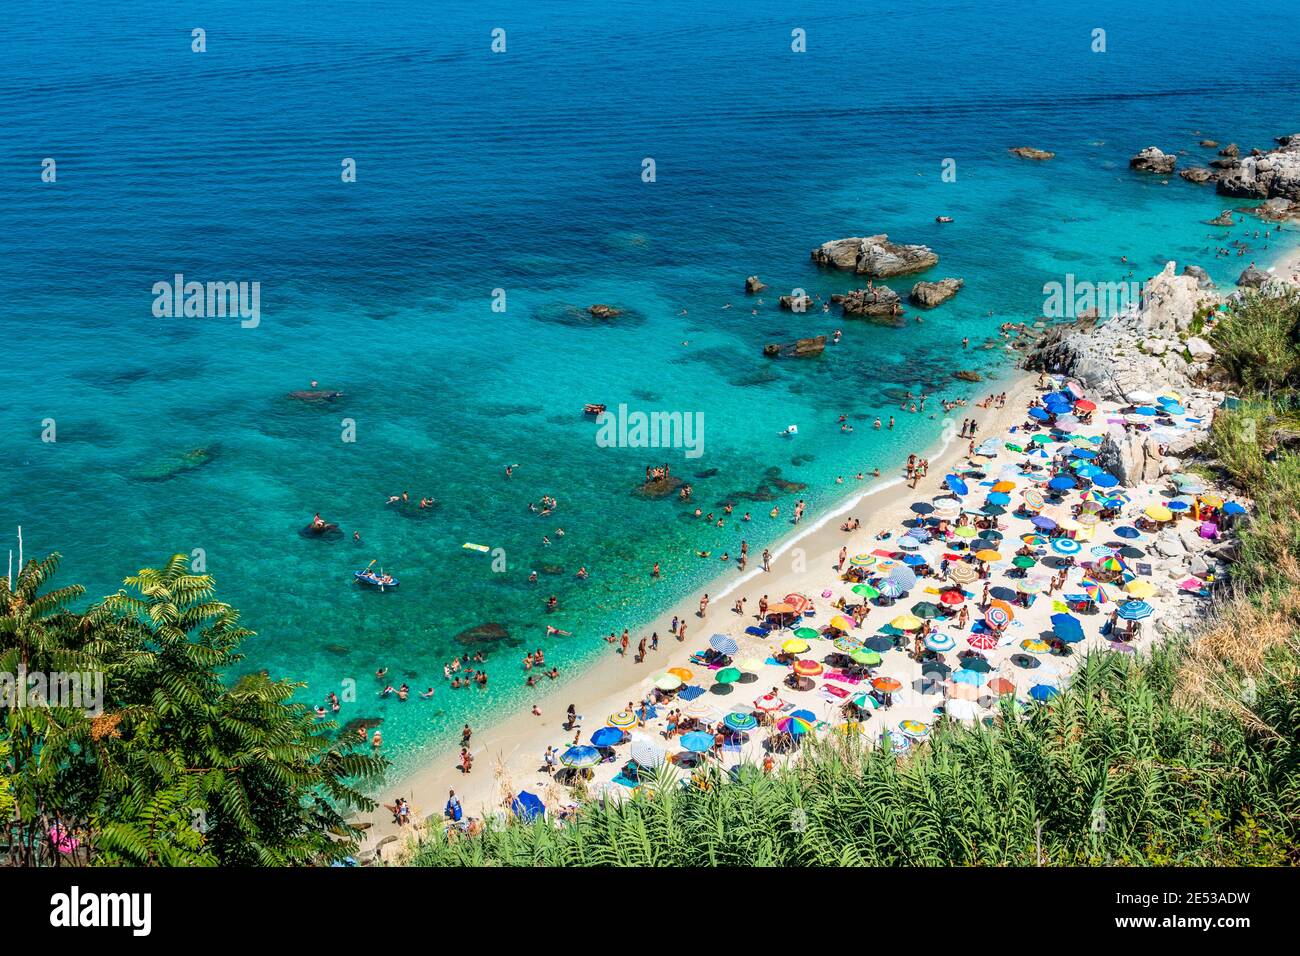 Michelino beach in Parghelia near Tropea during summertime, Calabria, Italy. Sandy beach full of vacationers and colorful umbrellas Stock Photo